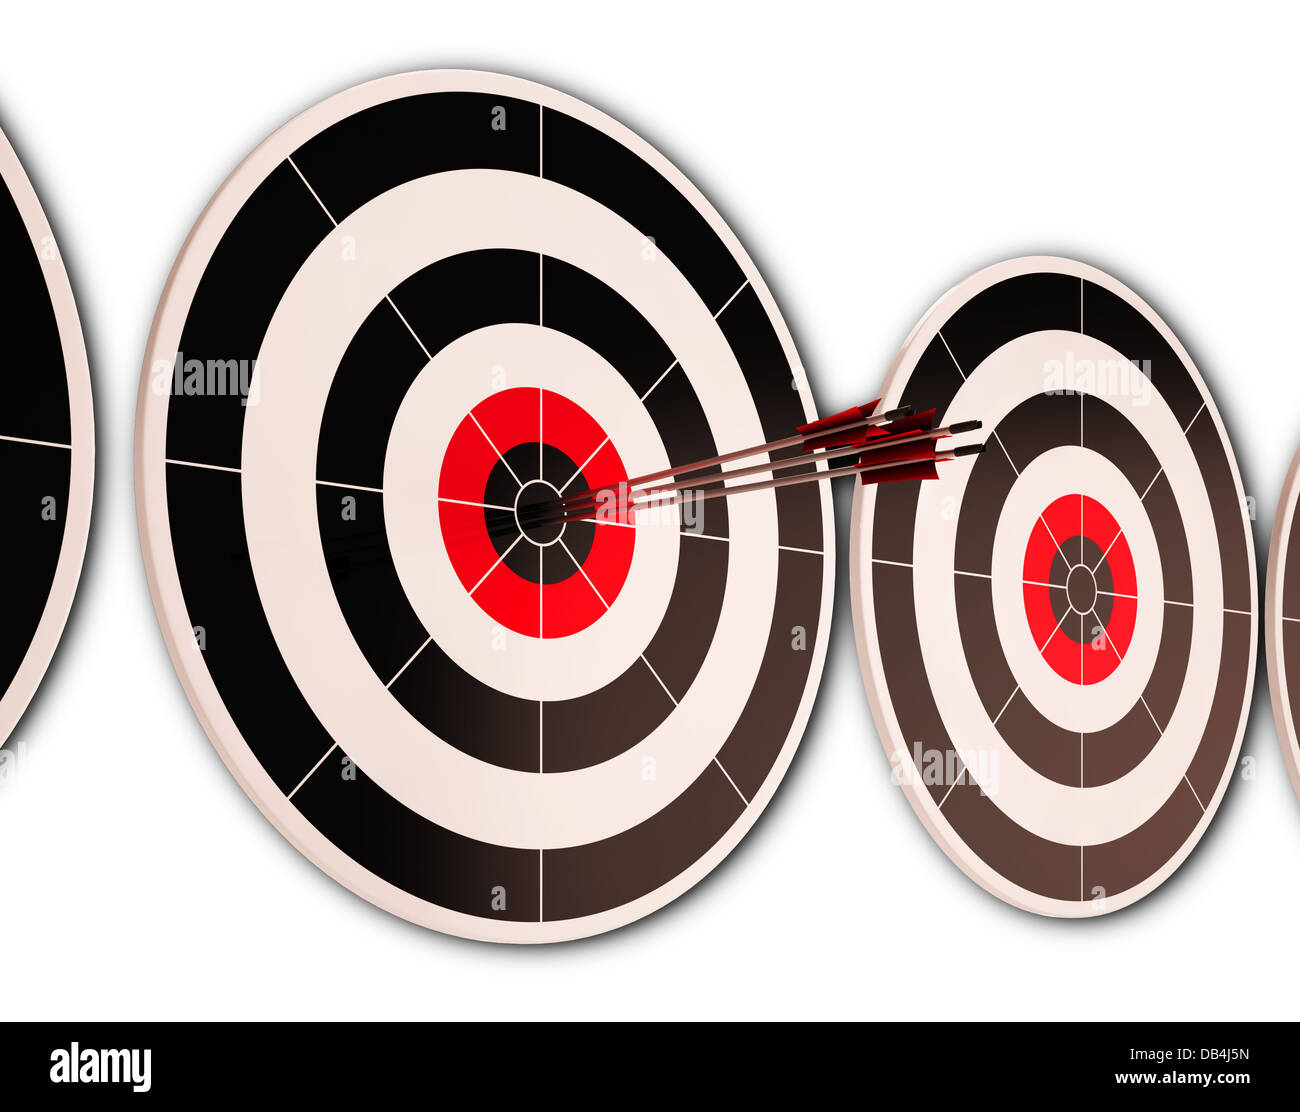 Triple Dart Shows Successful Performance And Result Stock Photo